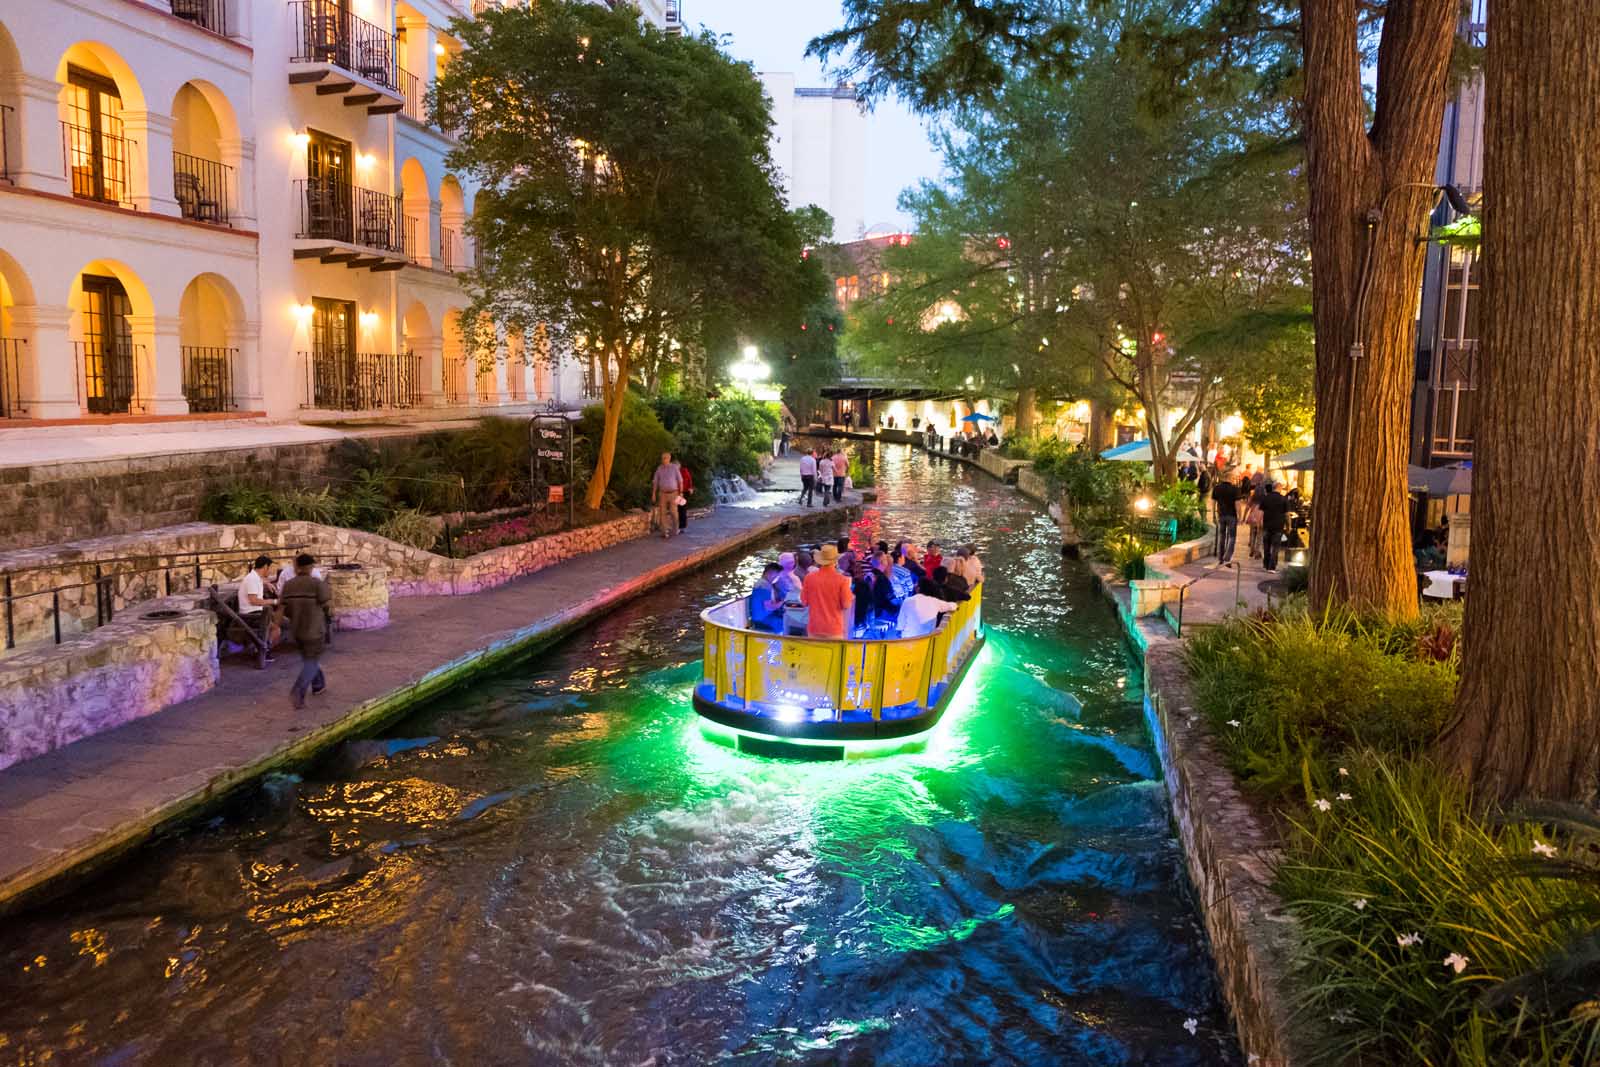 The 6 Best Things to Do in San Antonio TX: Attractions